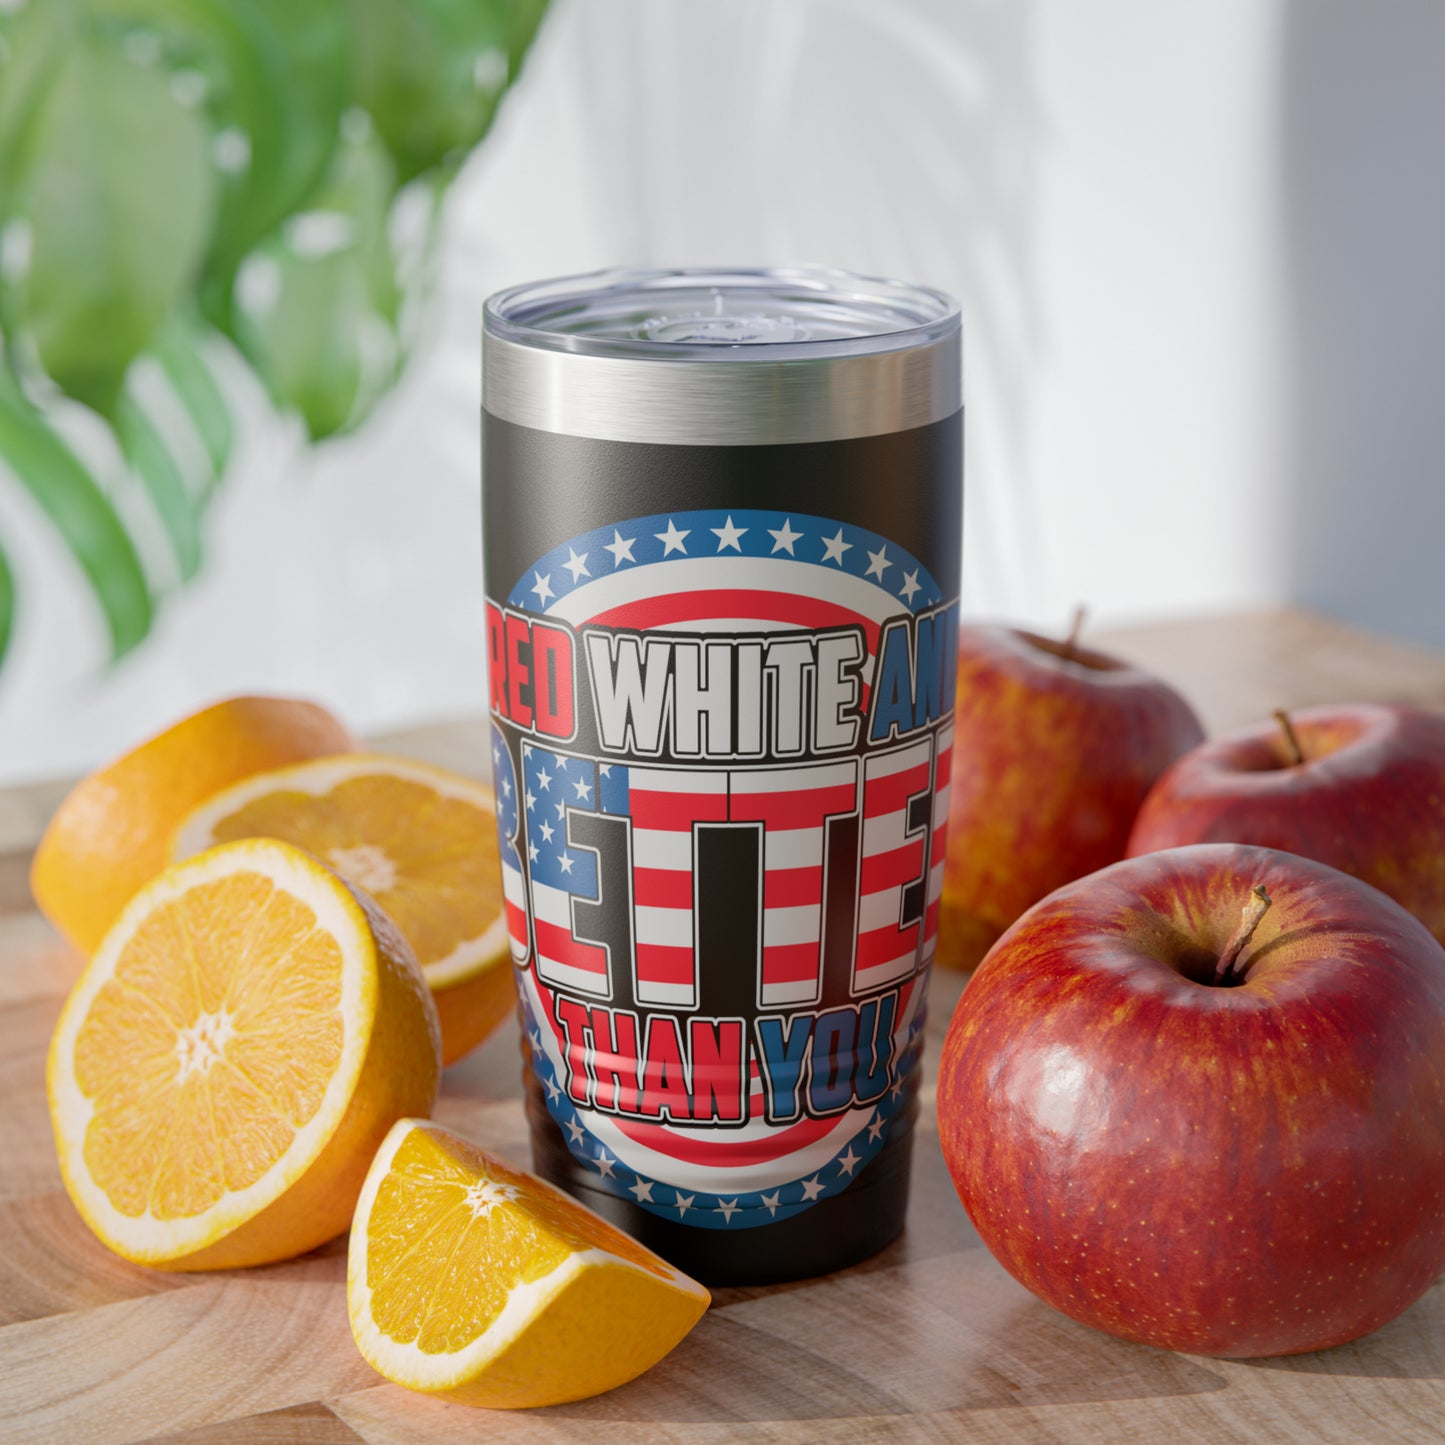 Red, White And Better Than You Ringneck Tumbler, 20oz for the USA Patriot